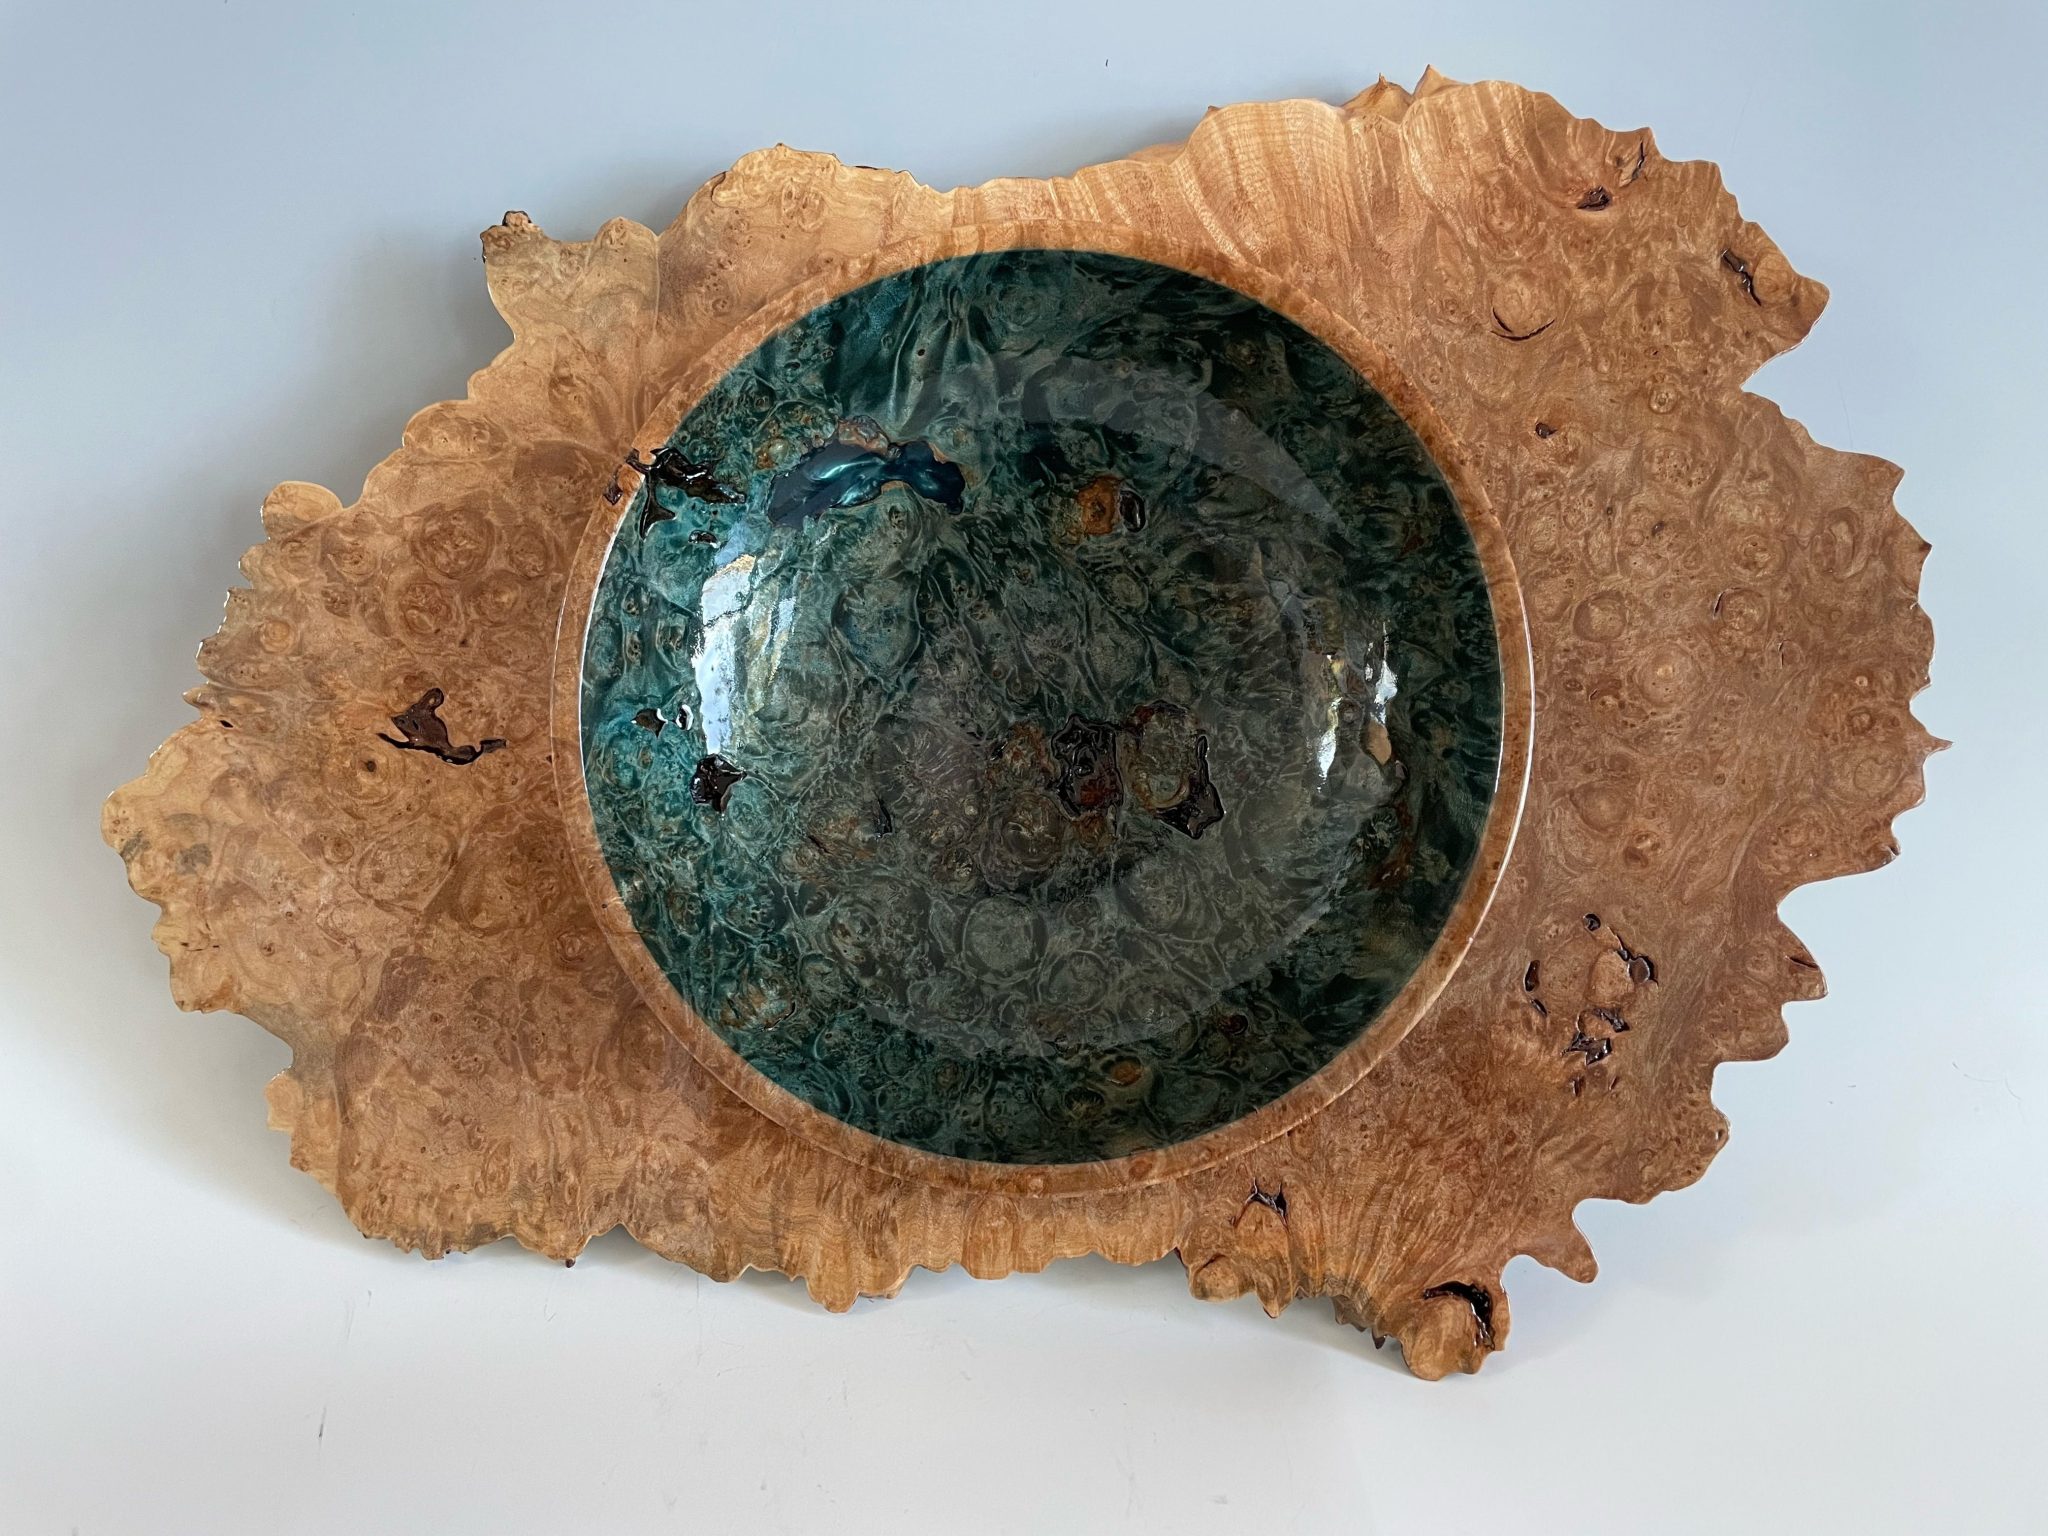 Big Leaf Maple Burl, dyed black/blue on the inside. It is an “embedded bowl”. To be donated to the upcoming Pinpoint Heritage Museum auction